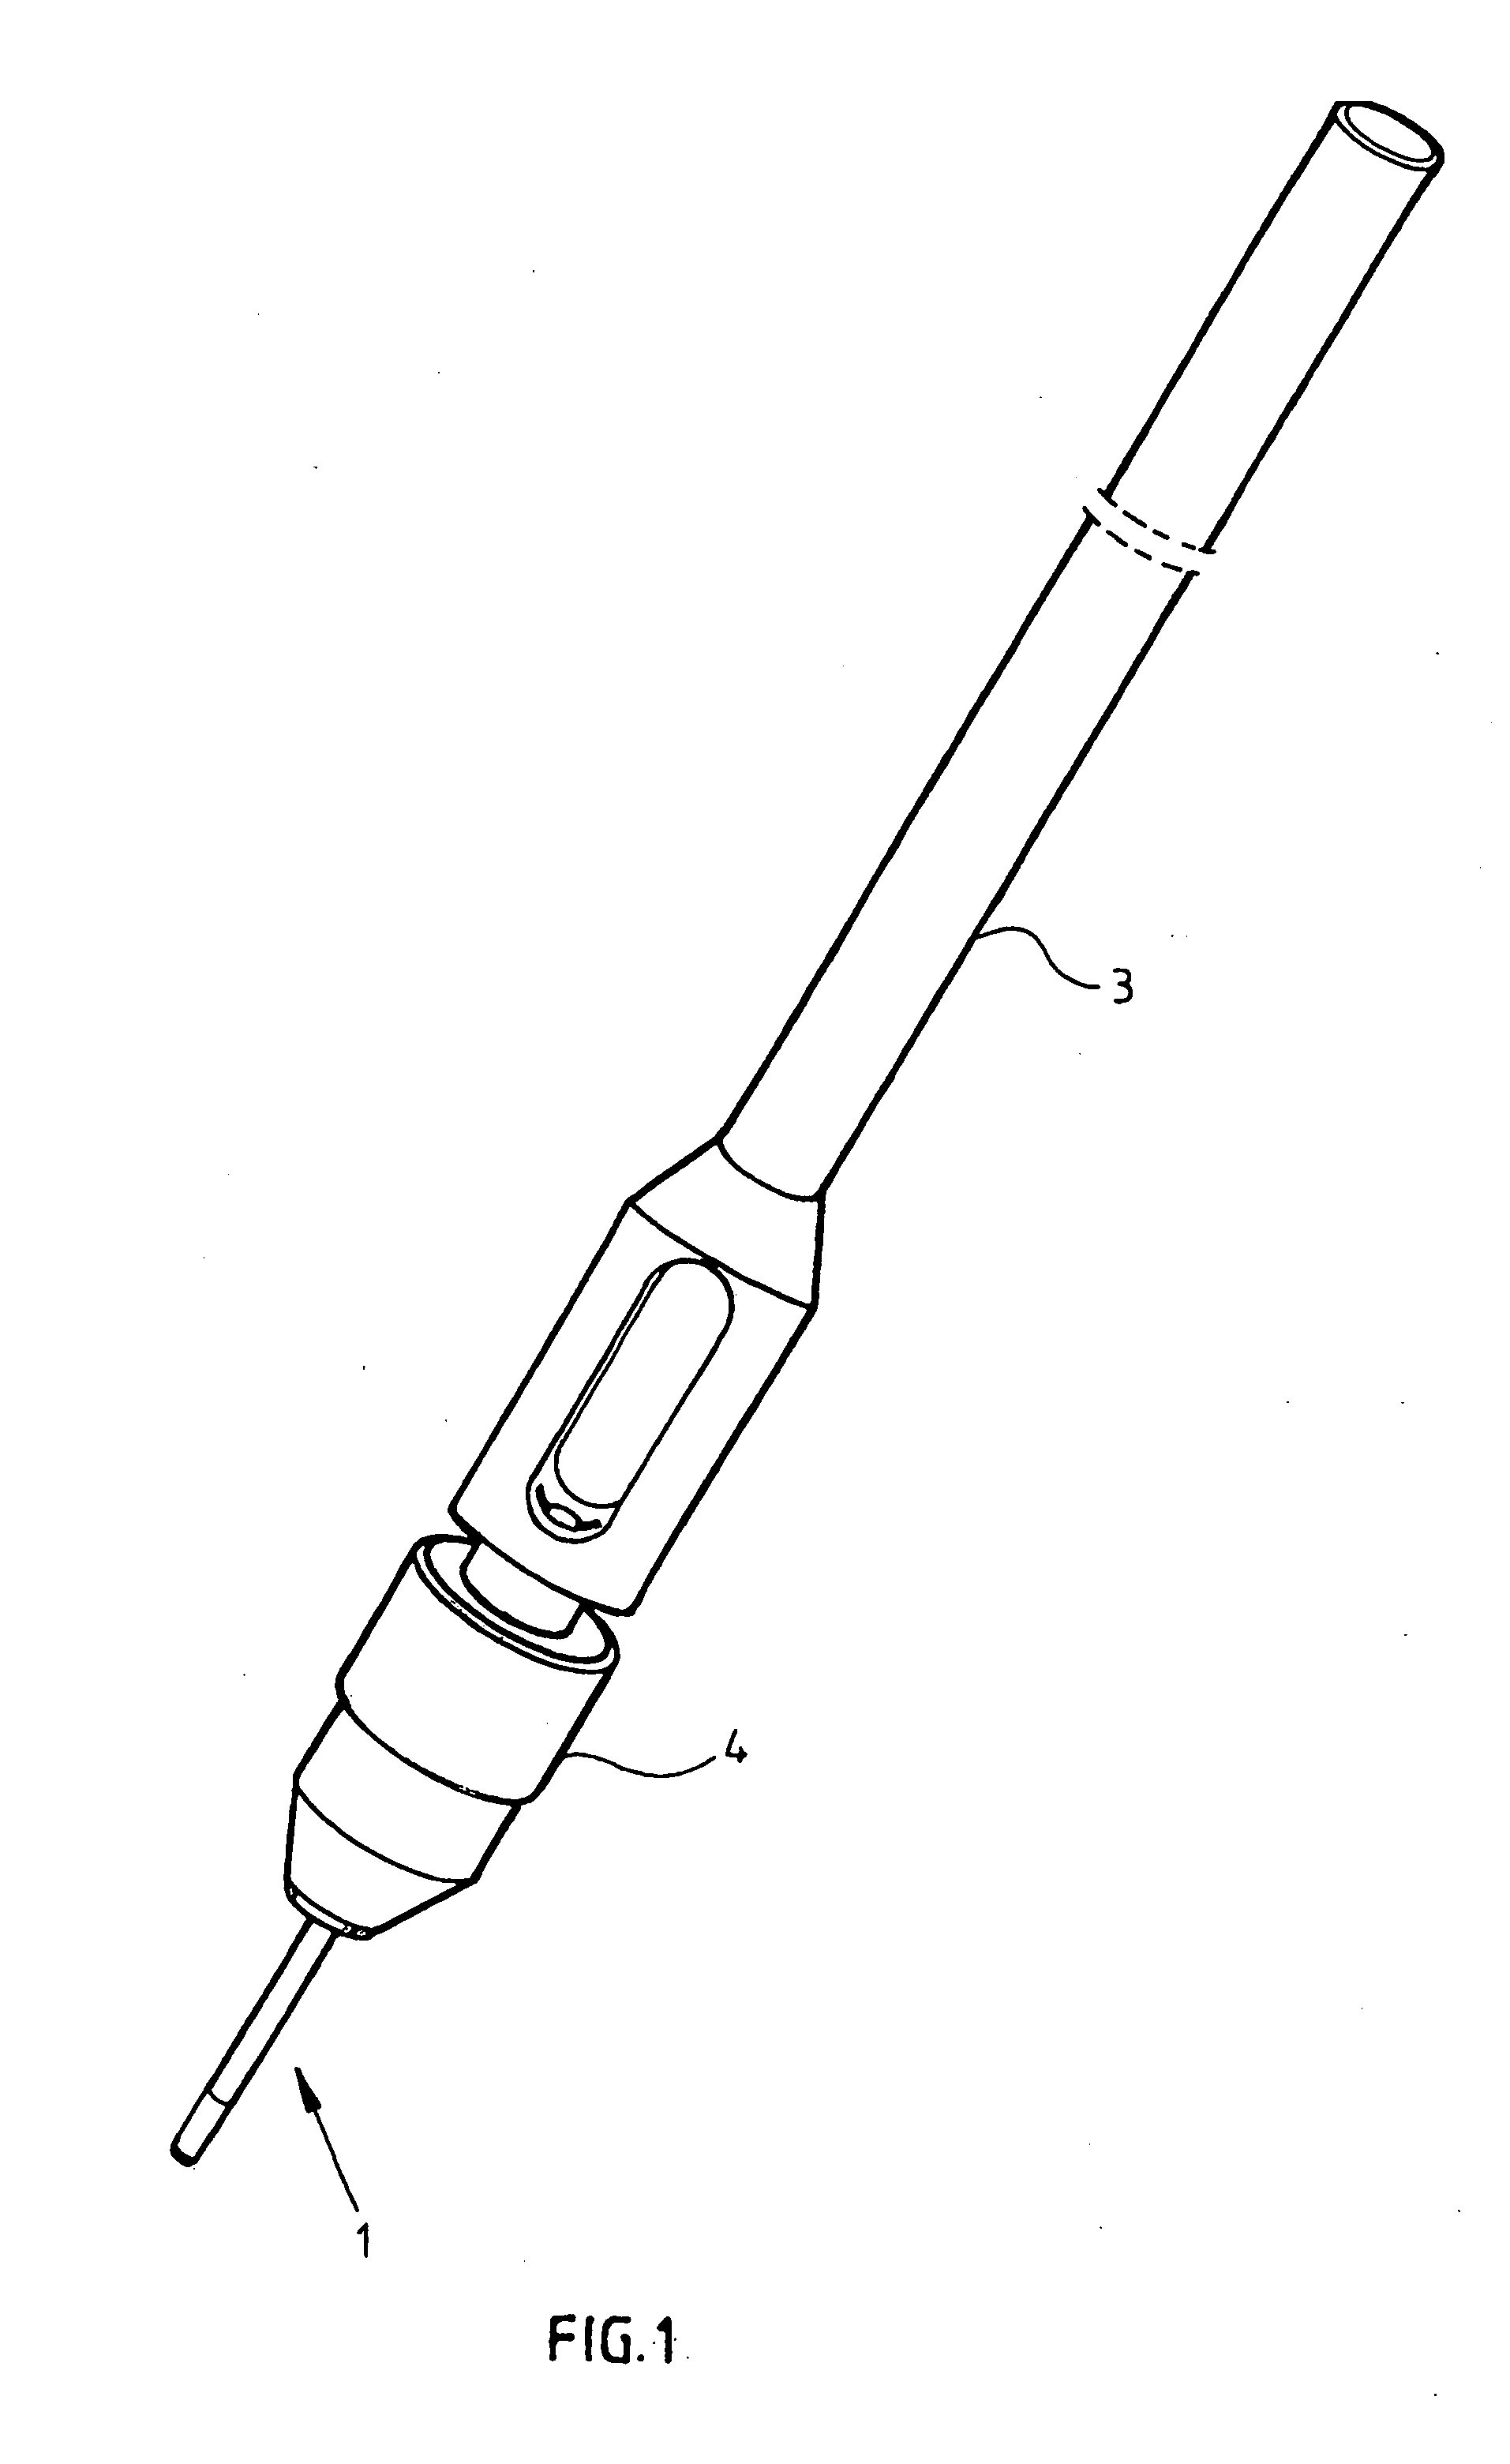 Hair transplanting device and method for the use thereof